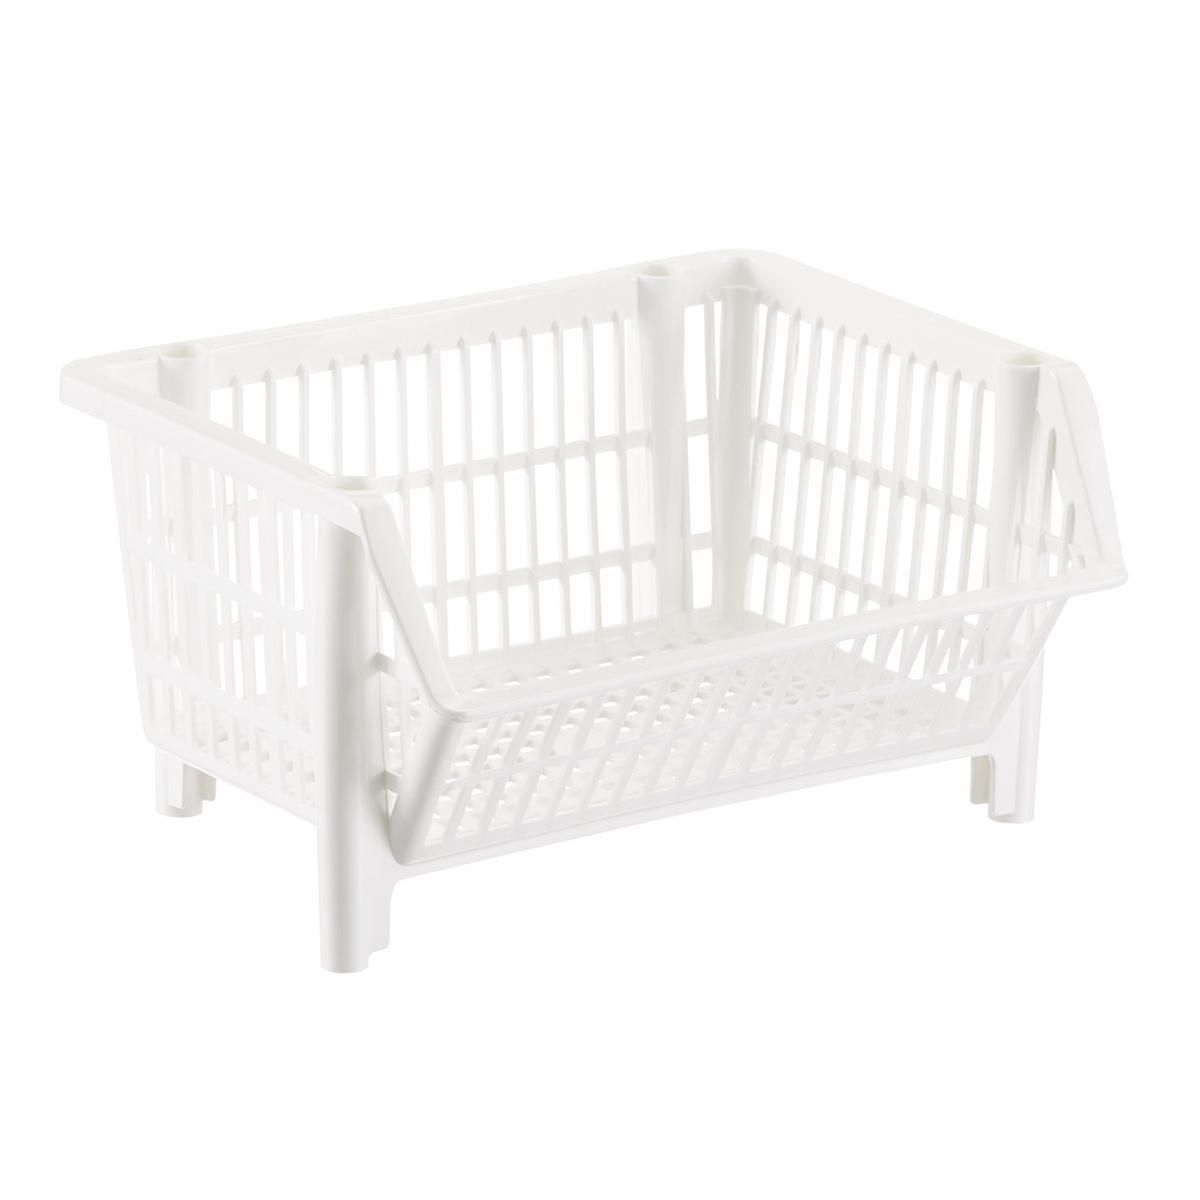 Our White Mini Stackable Basket | The Container Store